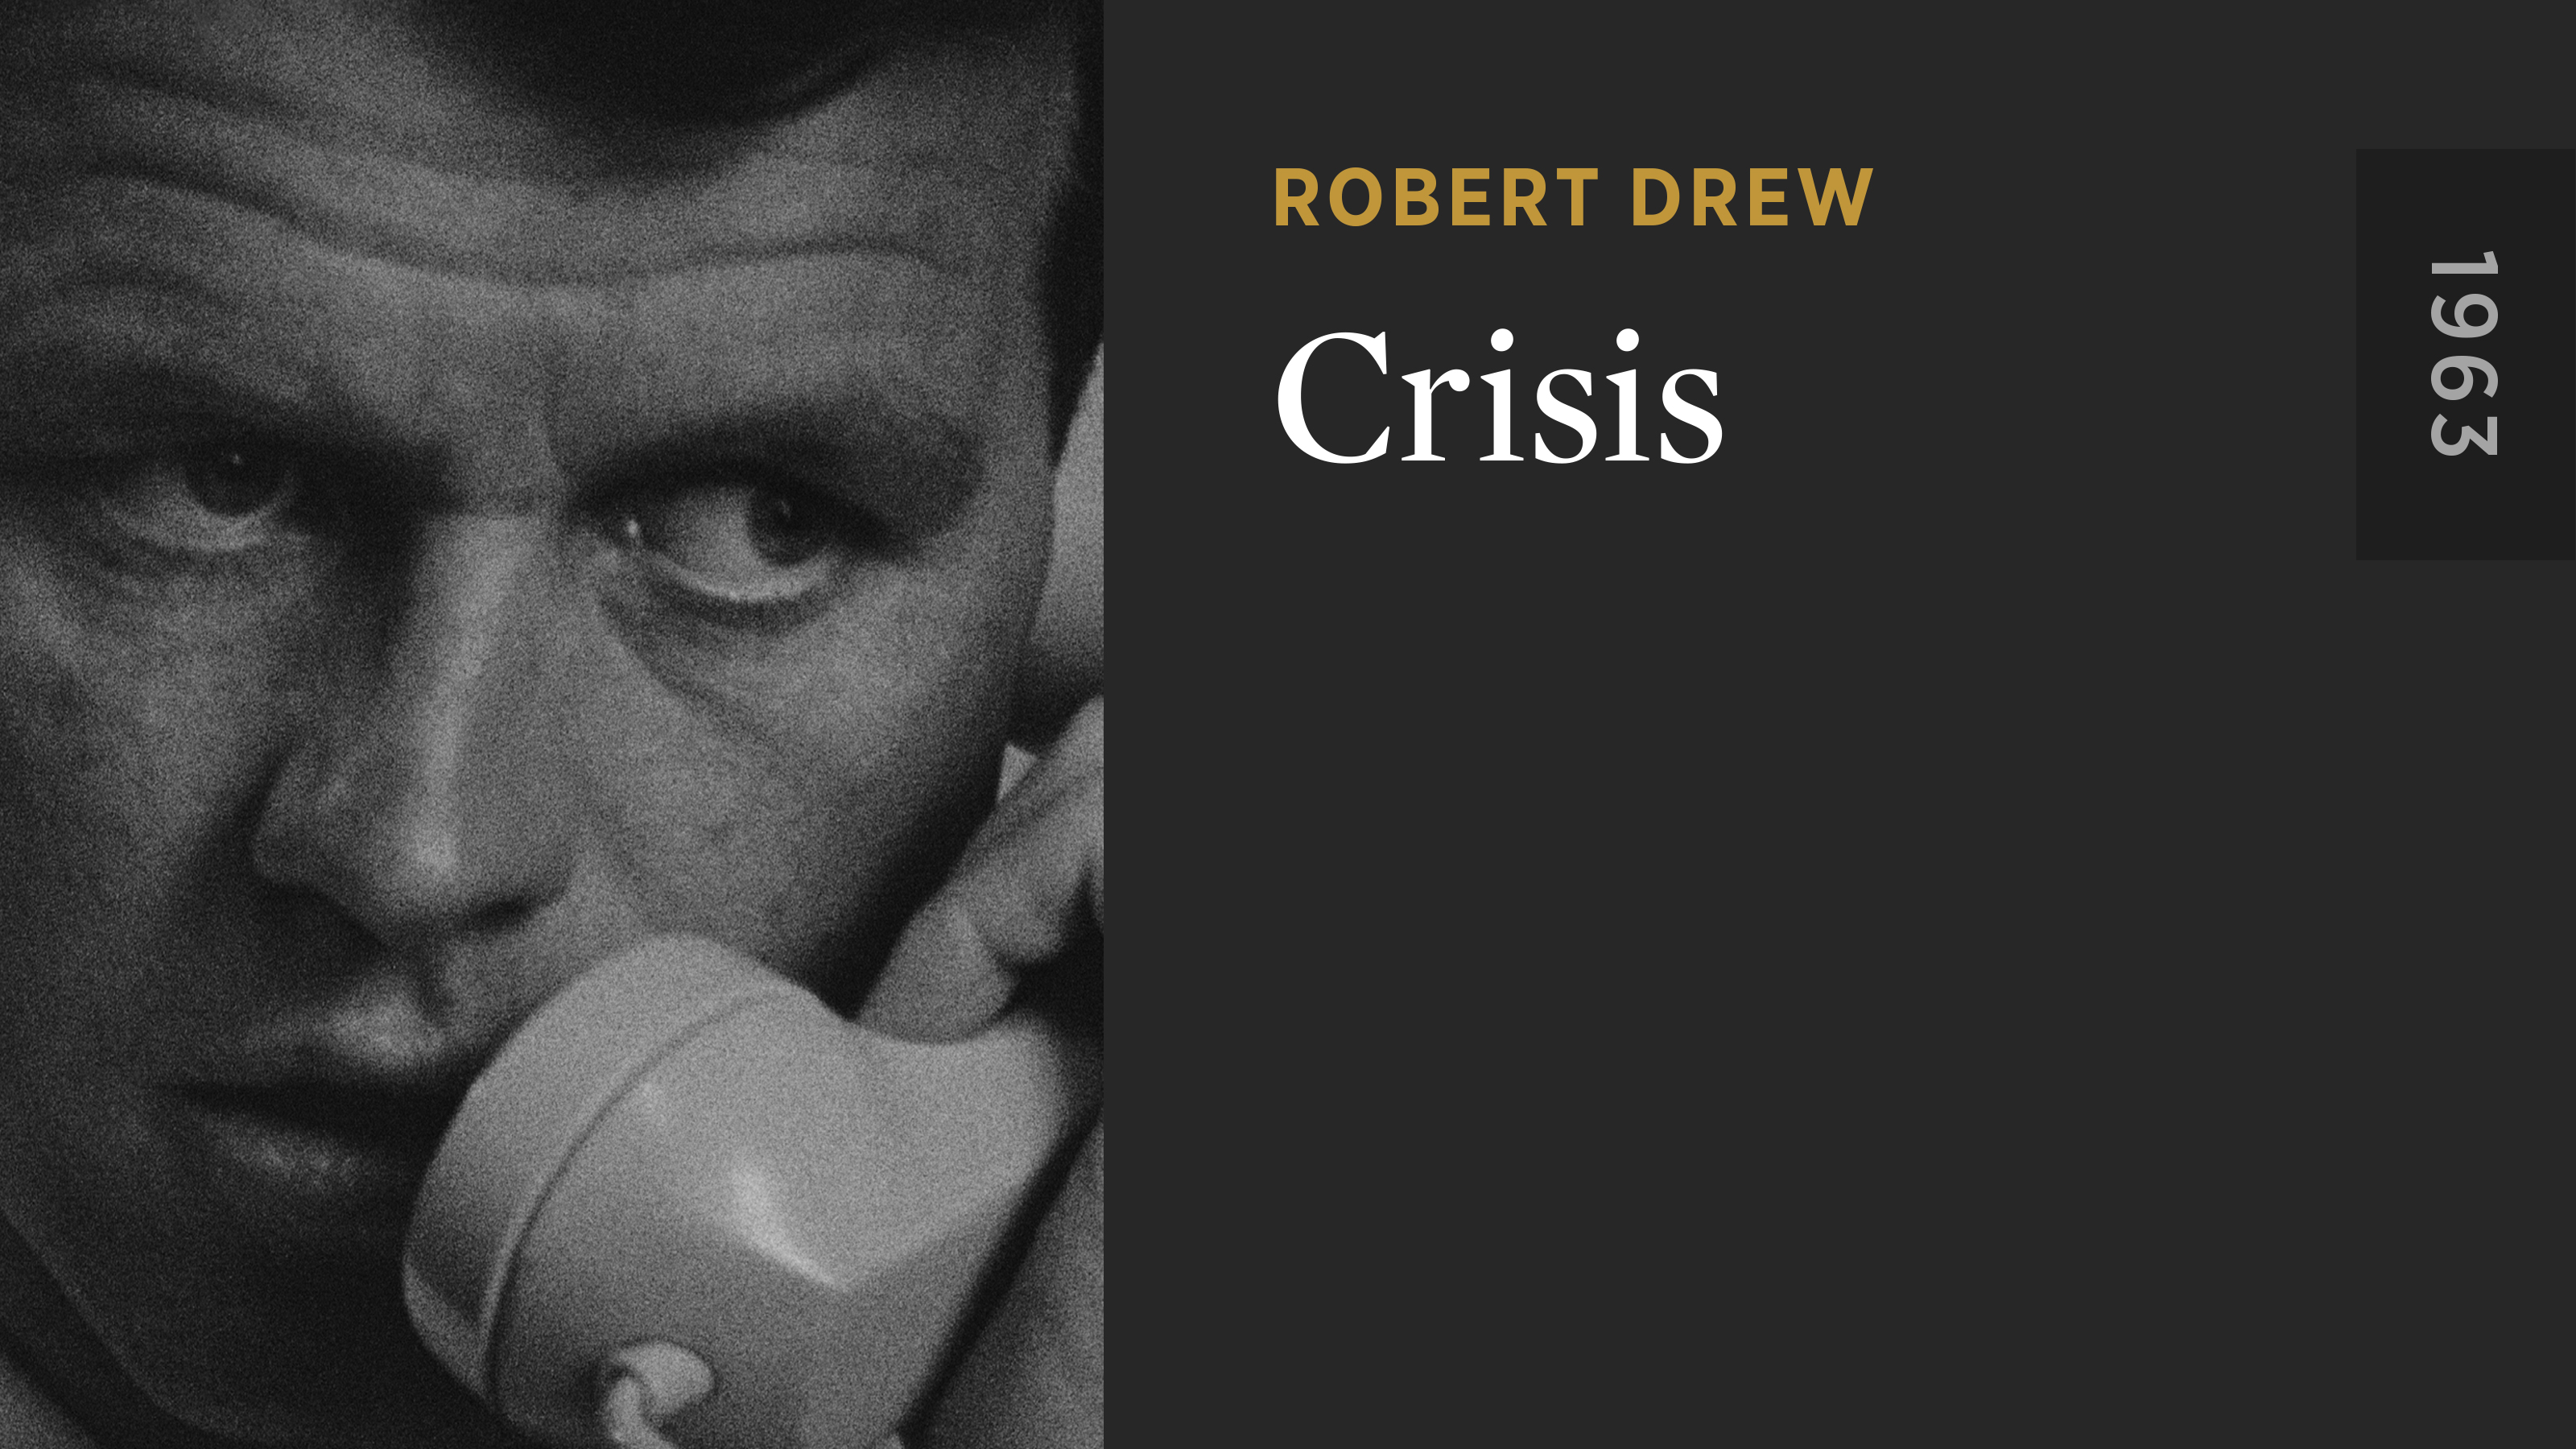 Crisis - The Criterion Channel